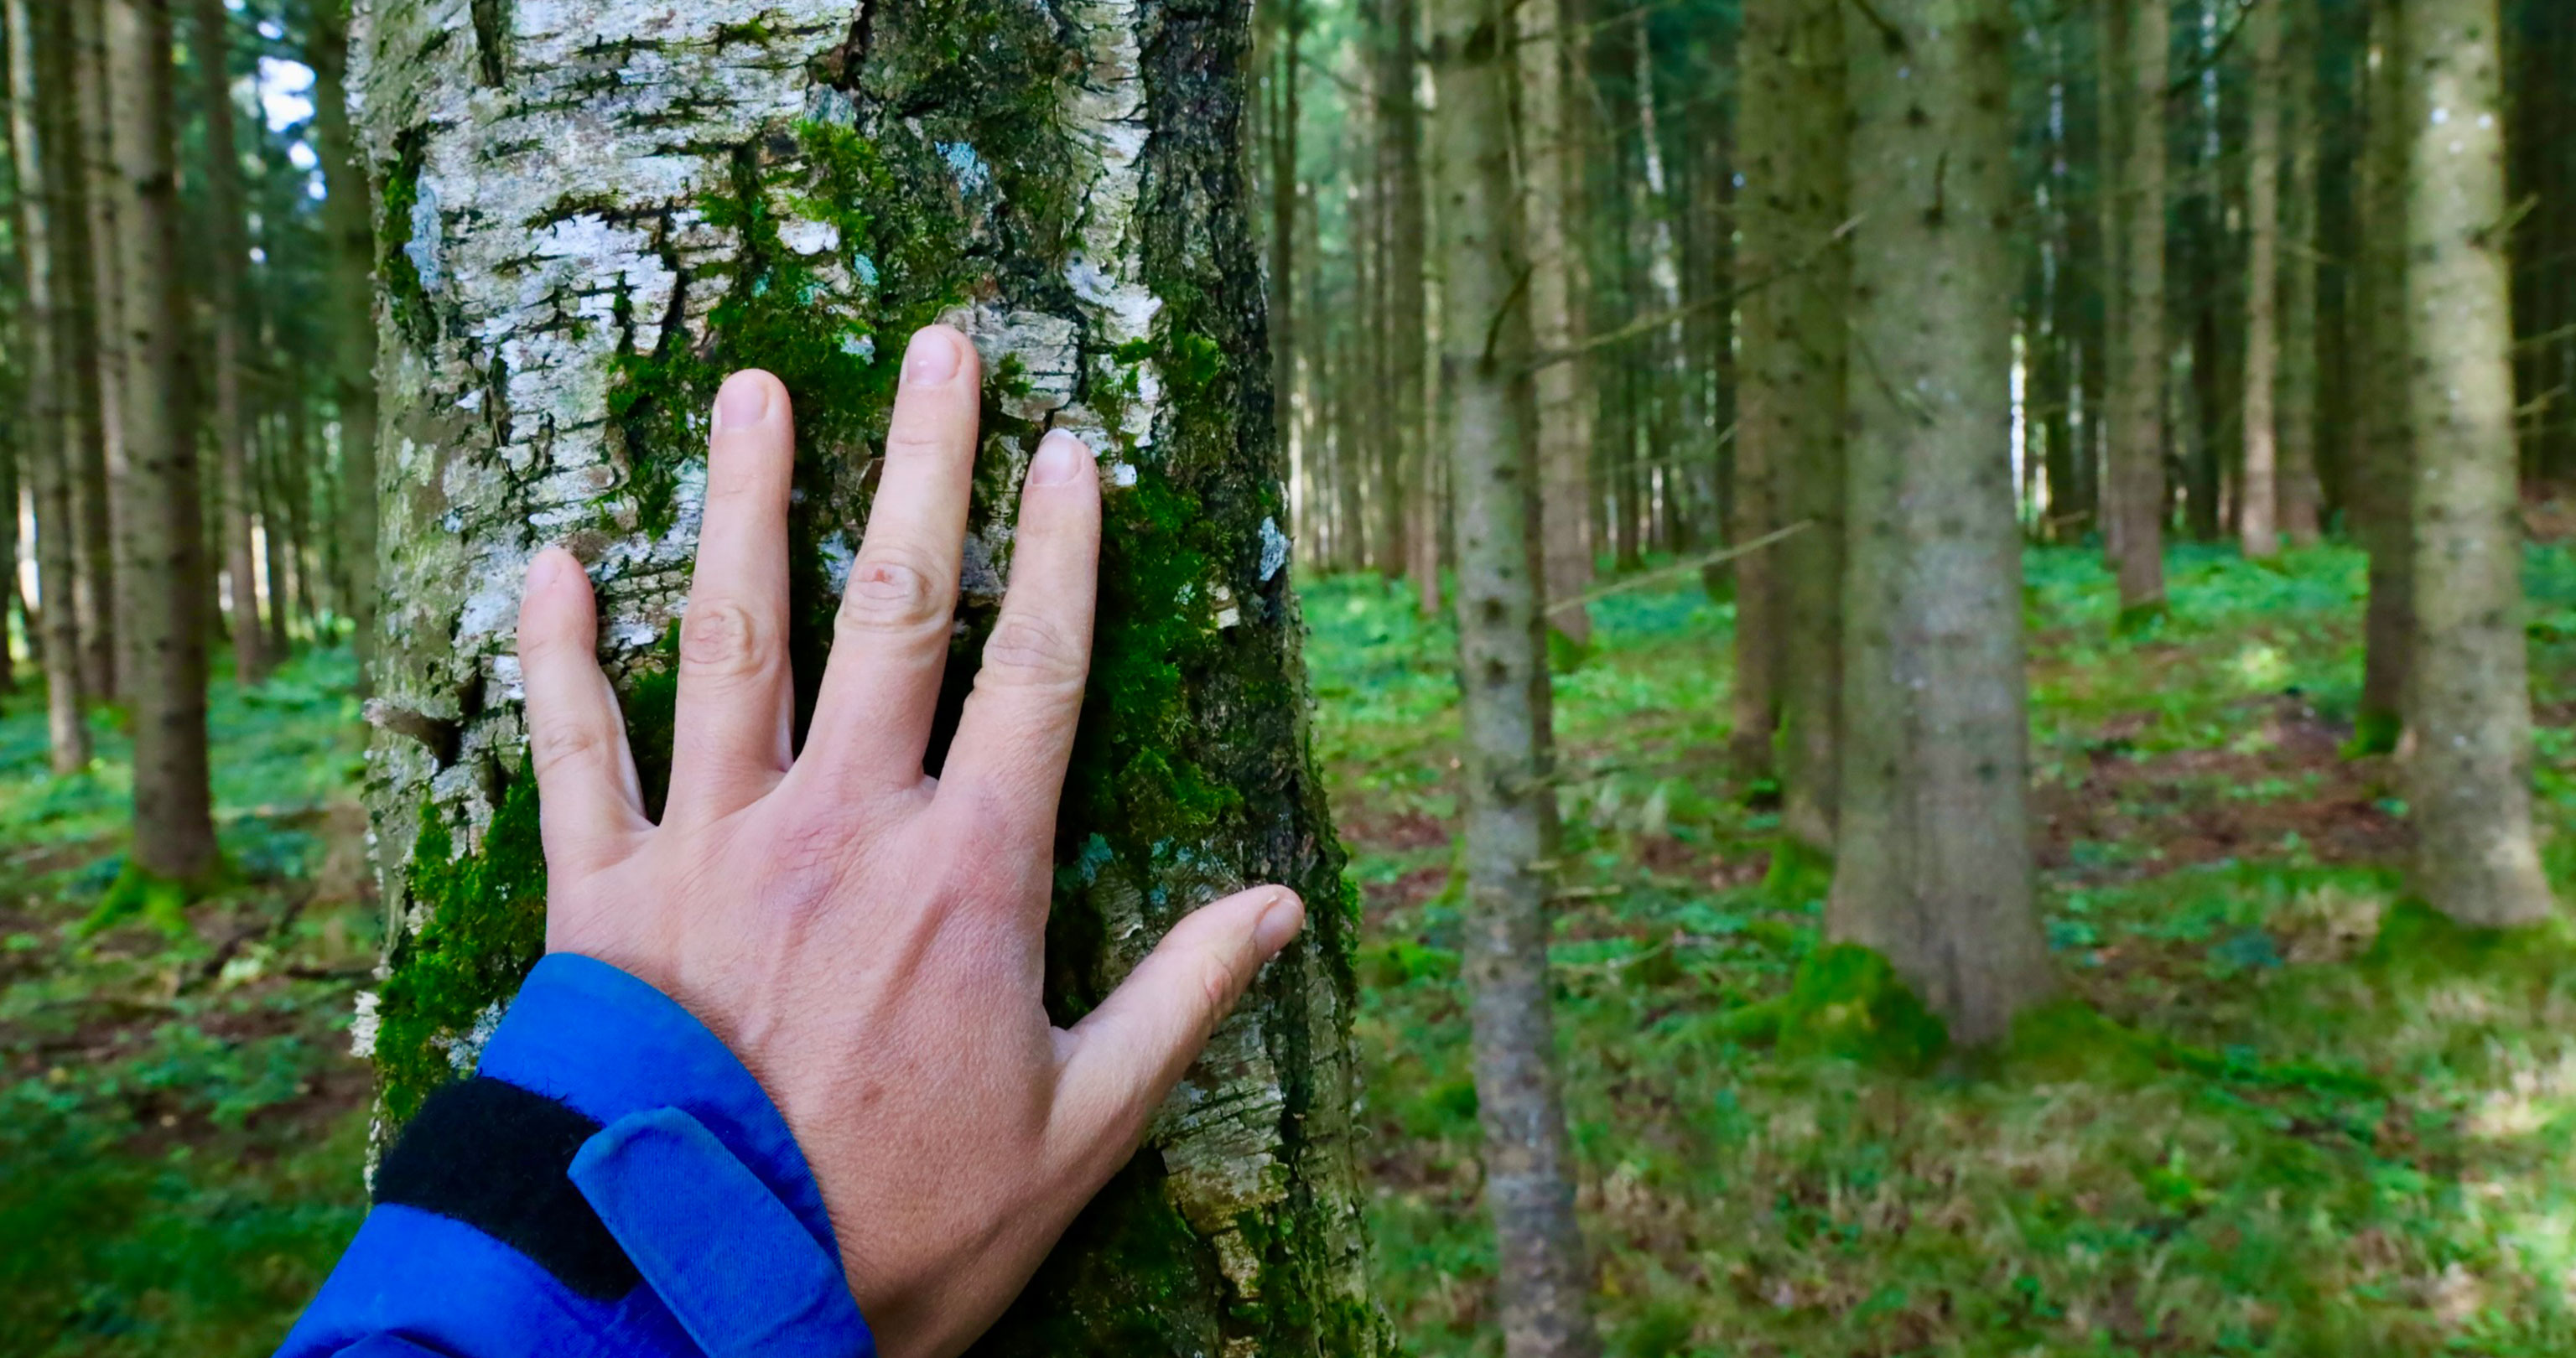 Forest bathing guide A hand touches a tree trunk